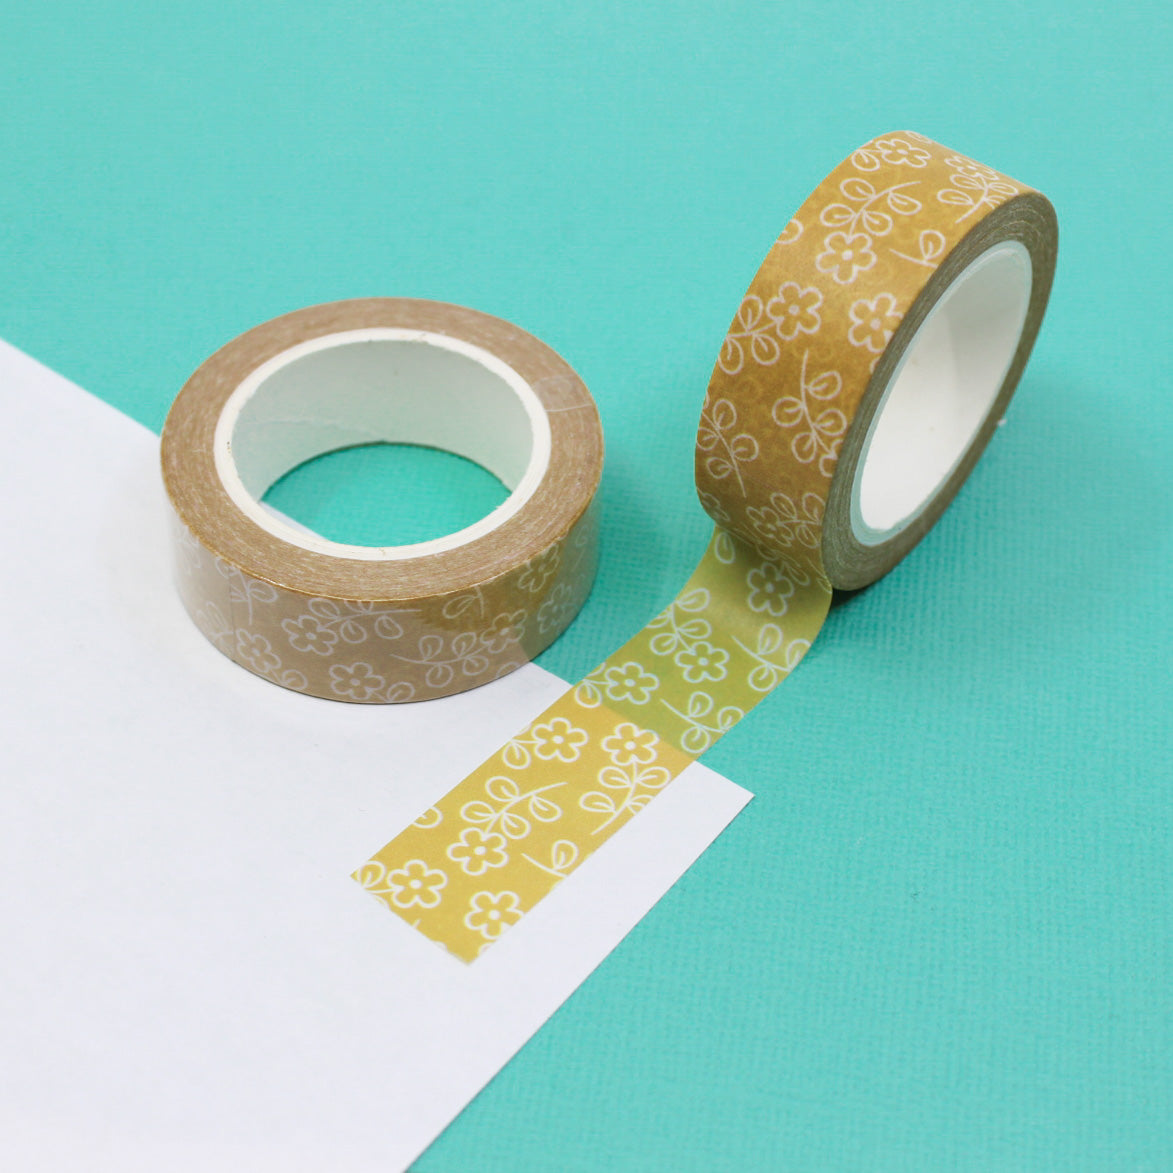 This vibrant washi tape features a pattern of yellow daisy flowers, perfect for adding a cheerful touch to your crafts and projects. This tape is sold at BBB Supplies Craft Shop.